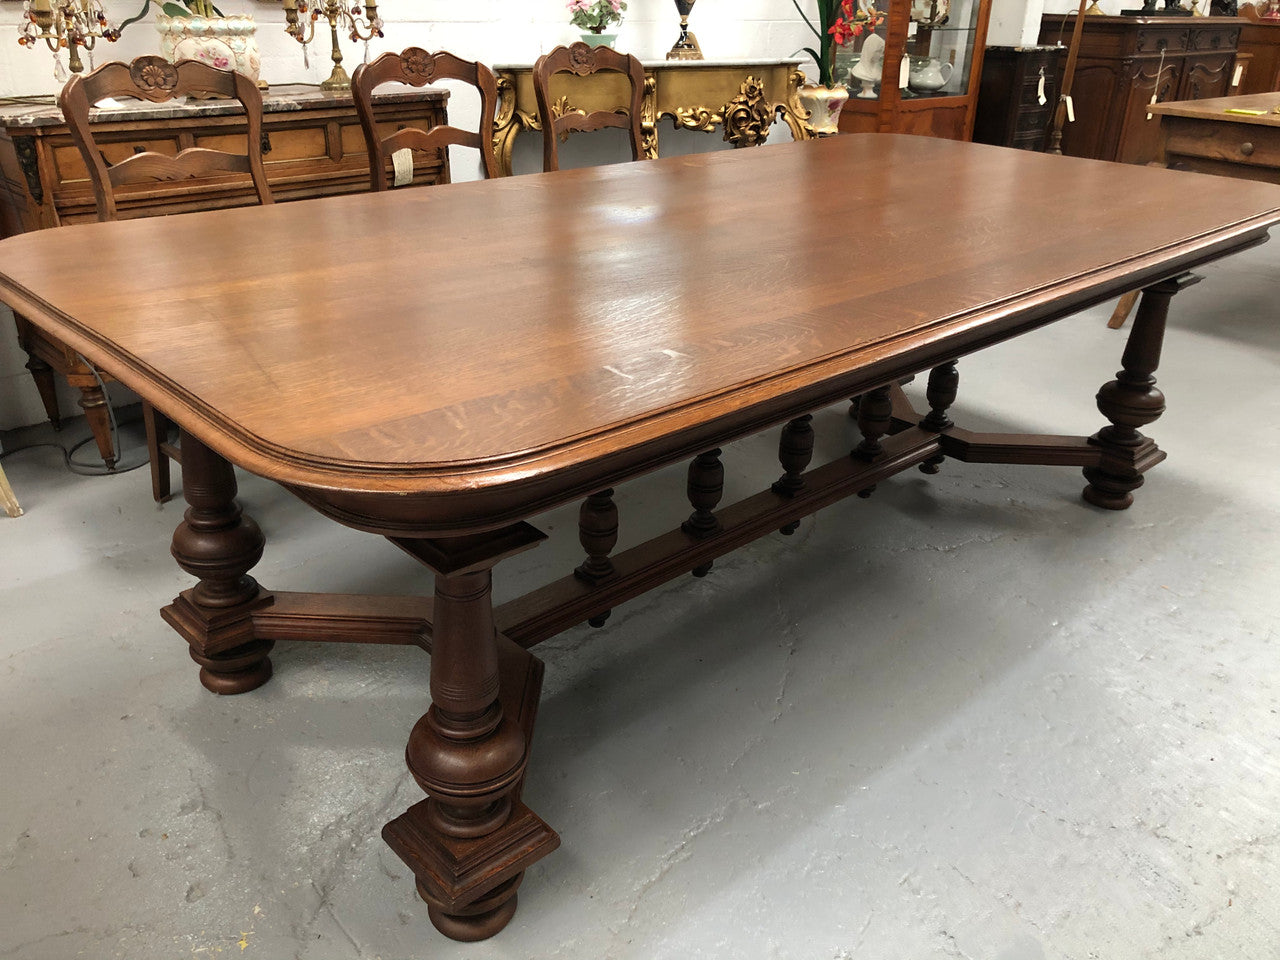 Large French Oak 19th century Henry II style dining table. It can seat 8 very comfortable and being very wide at 119 cm there is plenty of space to sit 10. In good original detailed condition.